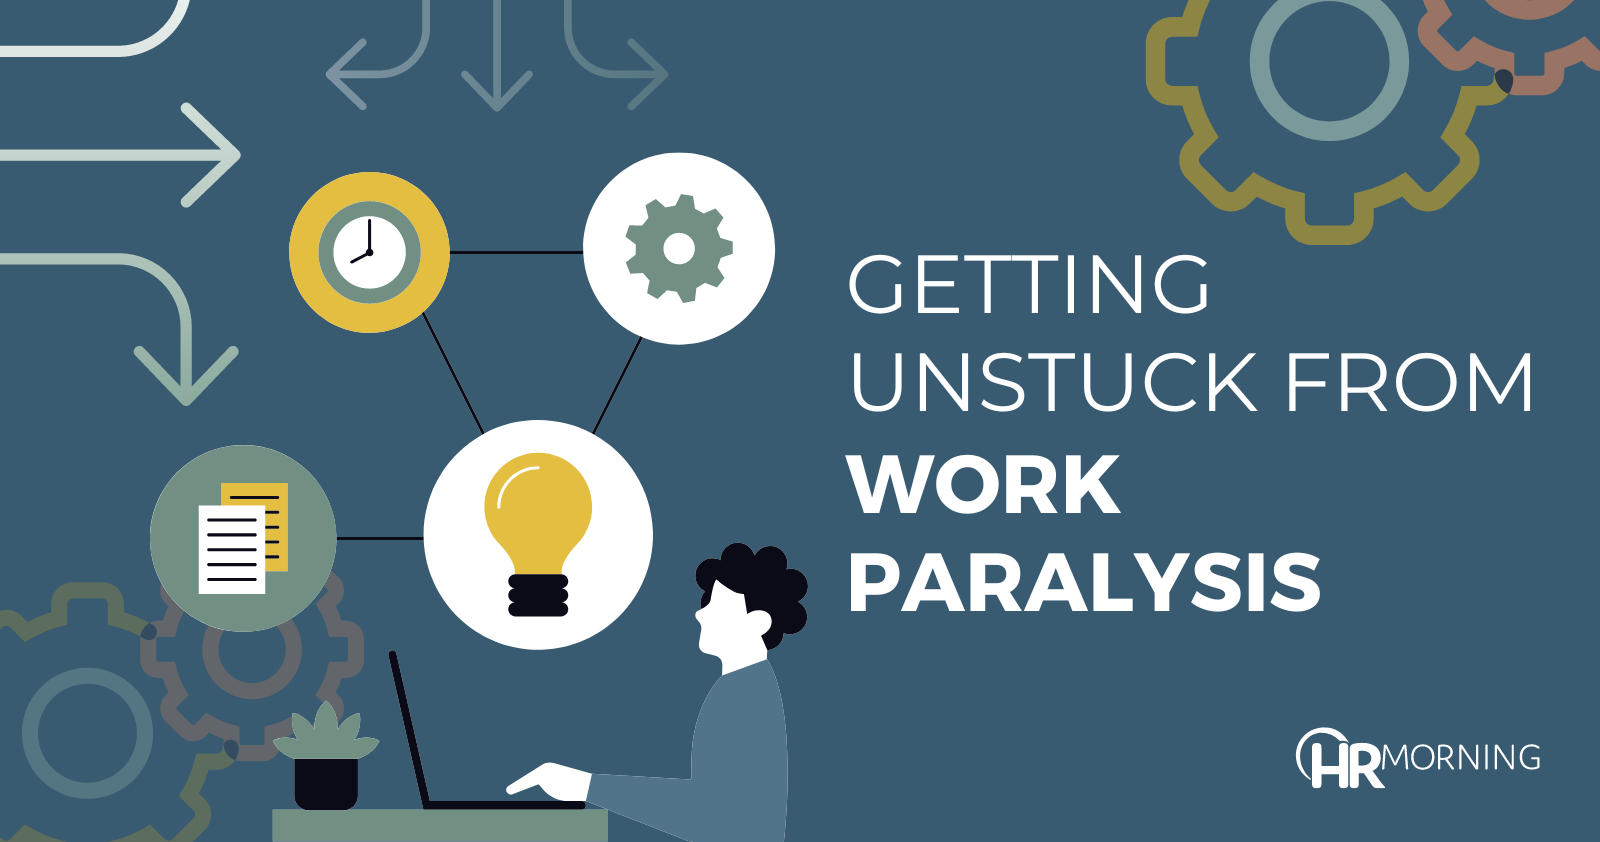 Getting unstuck from work paralysis